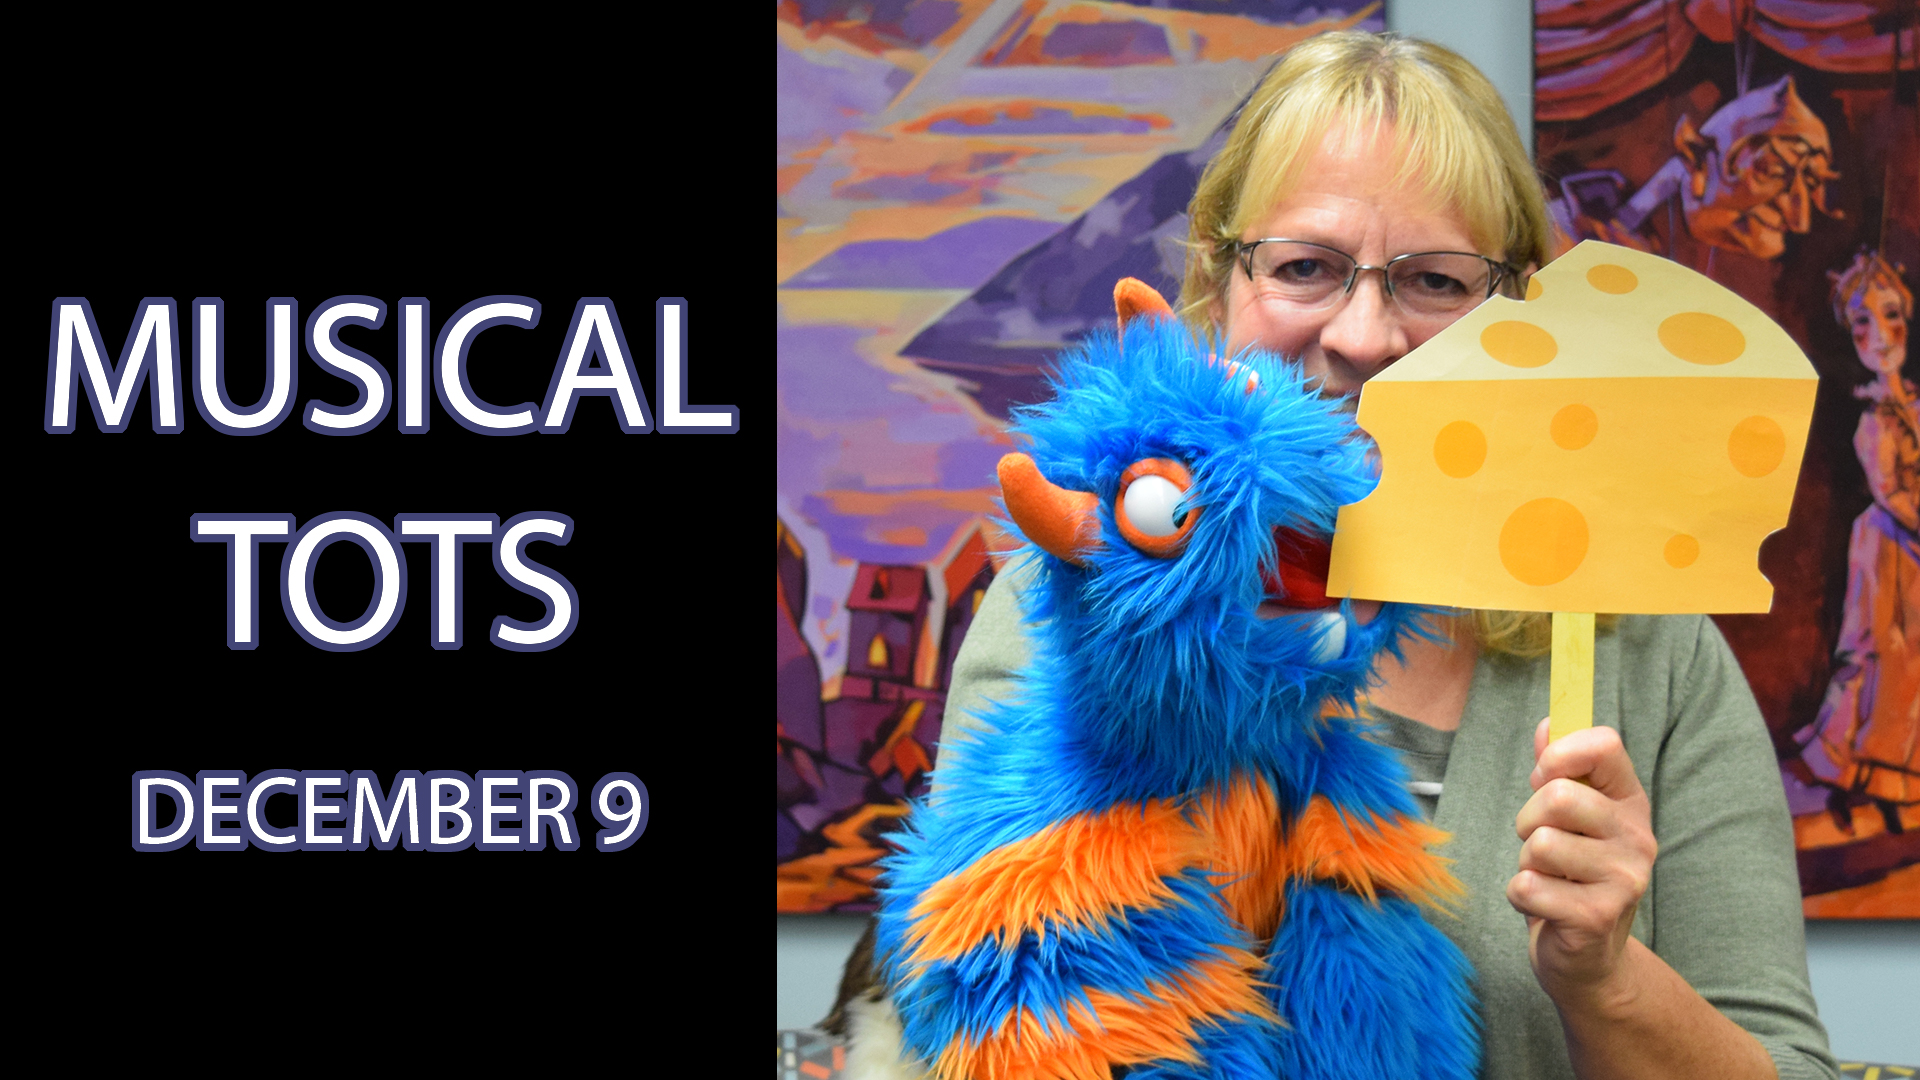 A woman holds a blue and orange monster puppet and a piece of fake cheese next to the text "Musical Tots December 9"